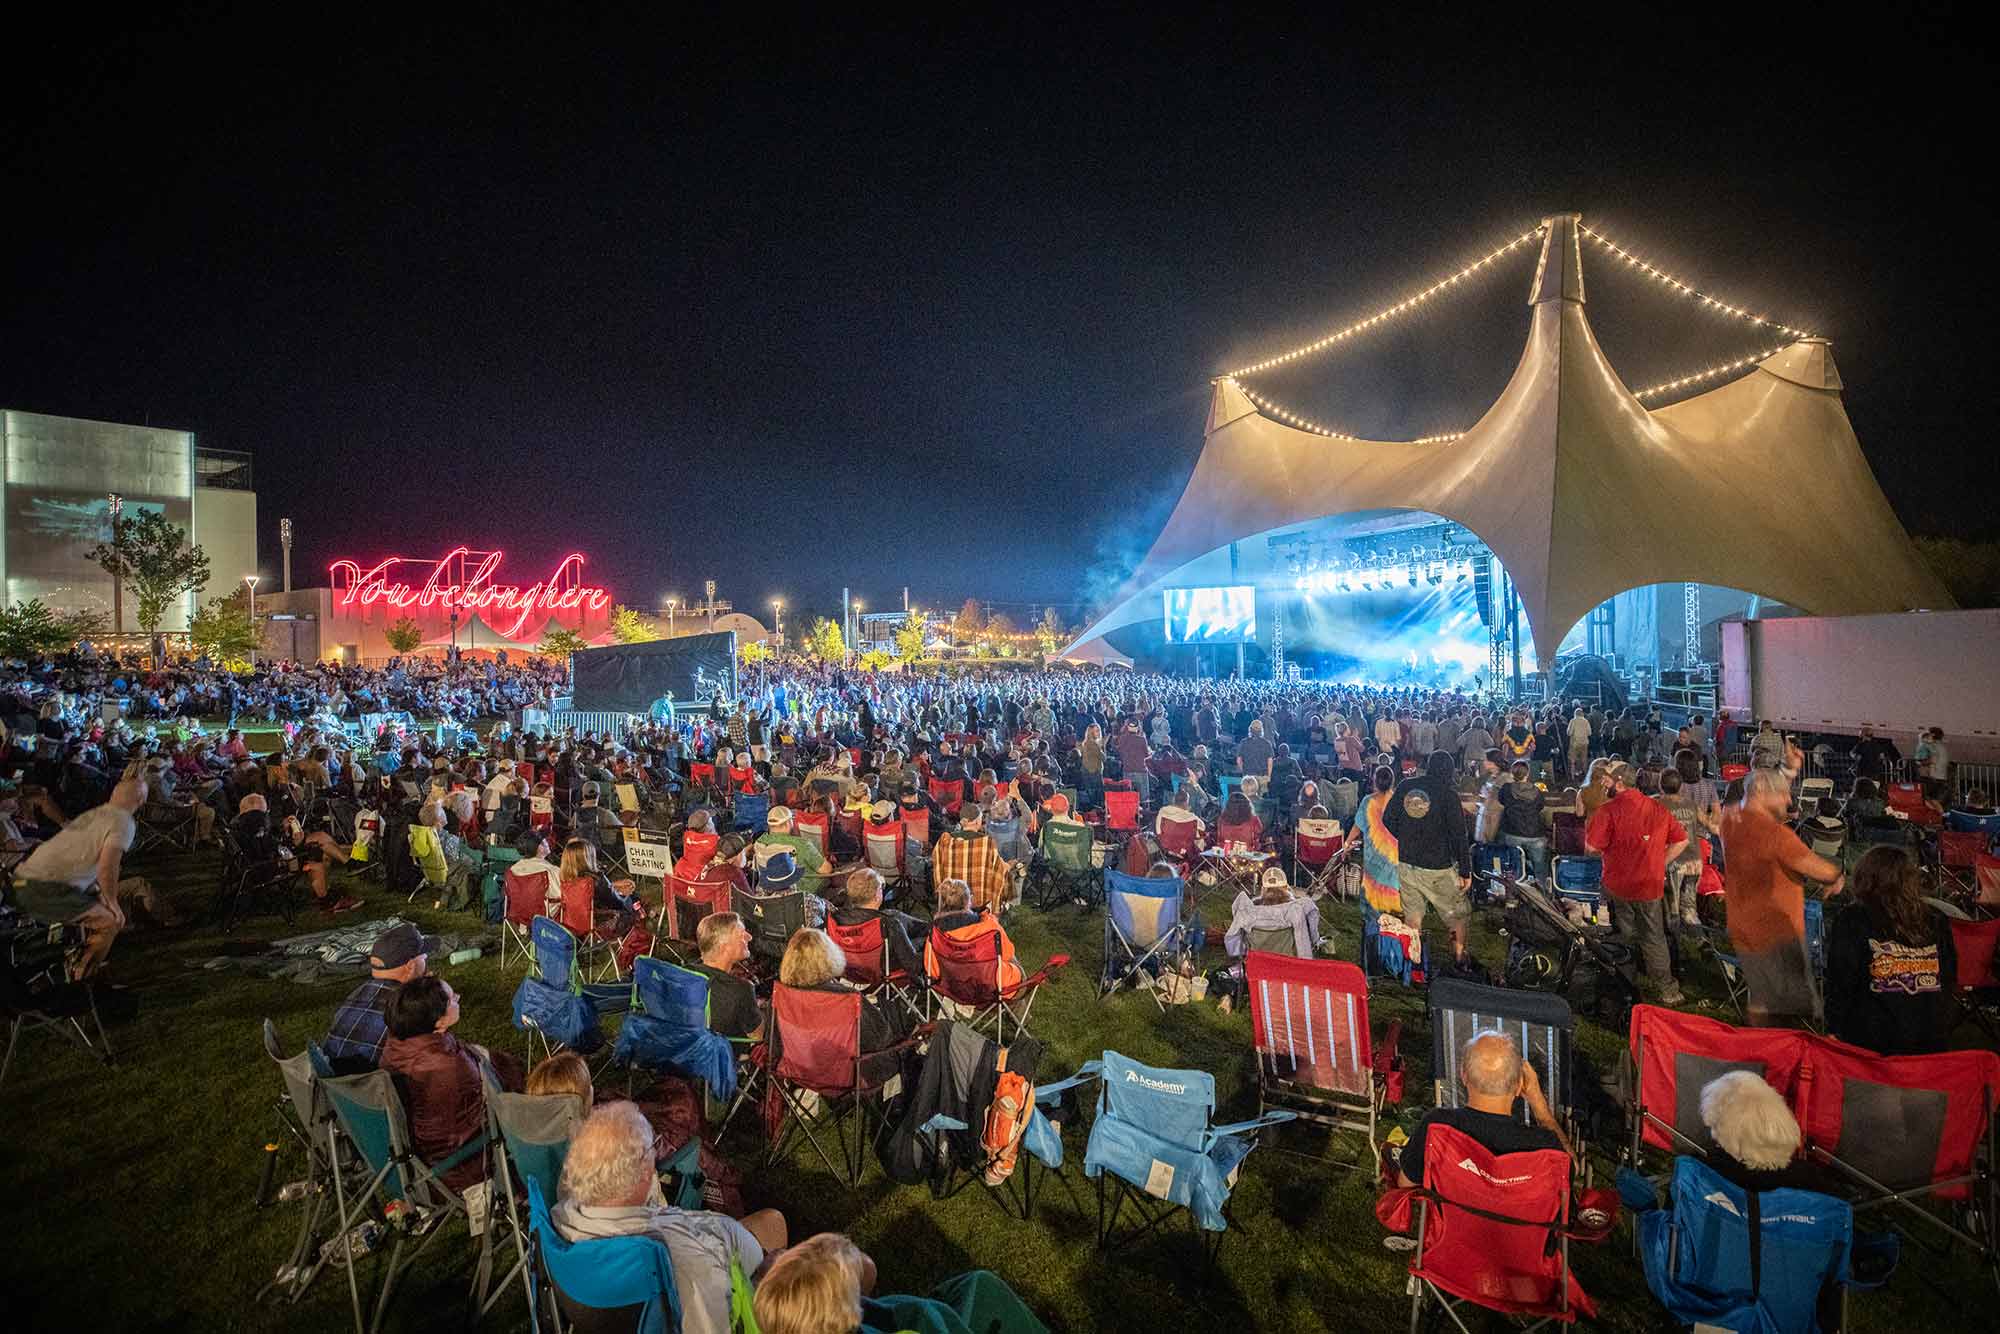 A crowd looks on to the stage on the momentary green at FreshGrass Bentonville 2021 at night